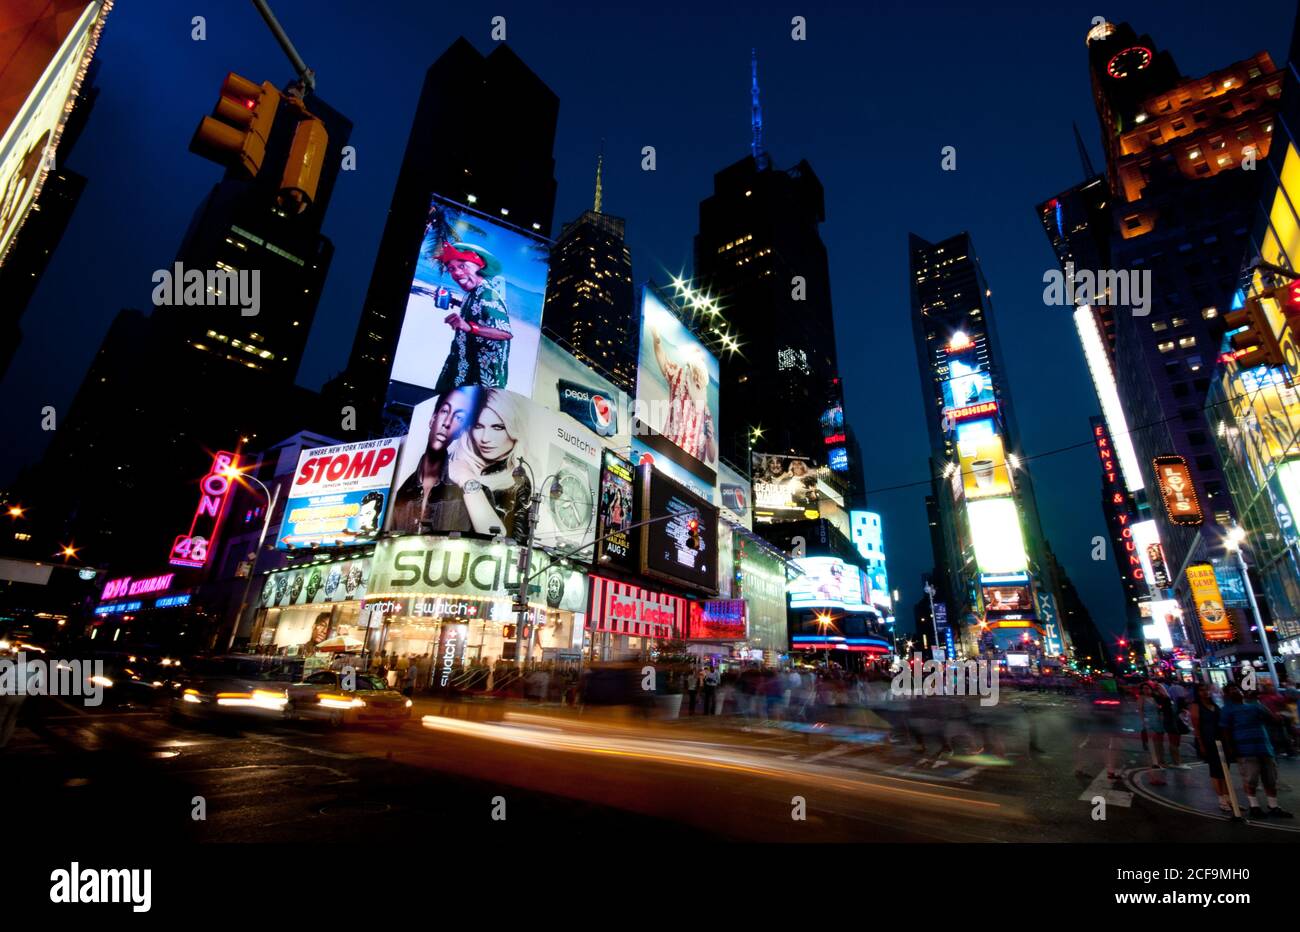 New York Times Square with illuminated billboards and moving people. Stock Photo